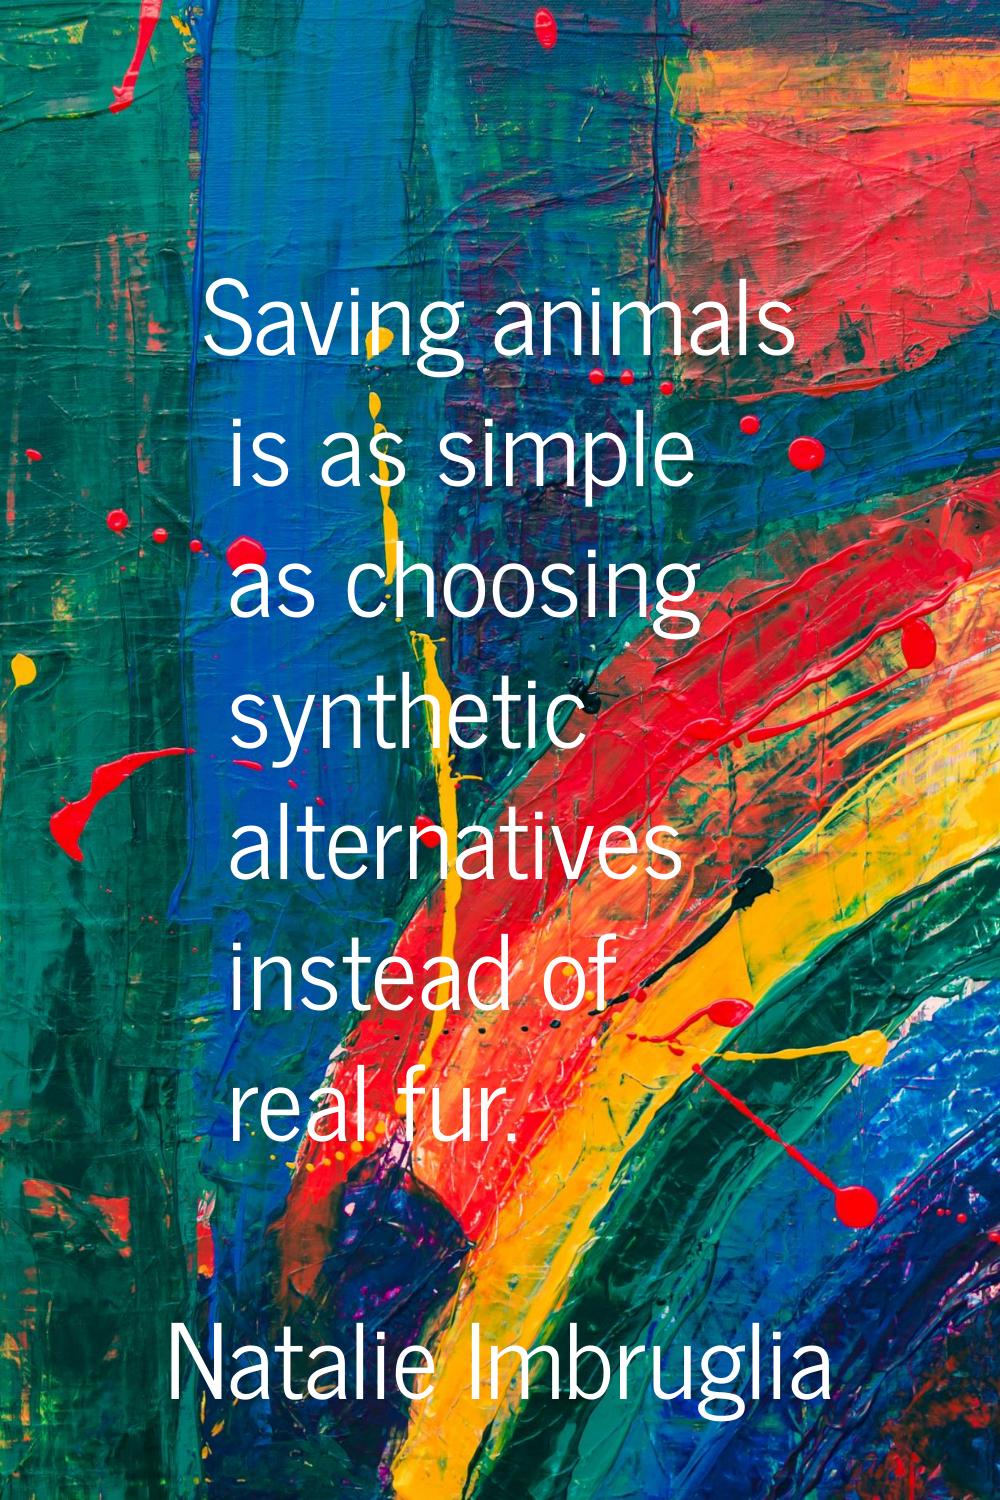 Saving animals is as simple as choosing synthetic alternatives instead of real fur.